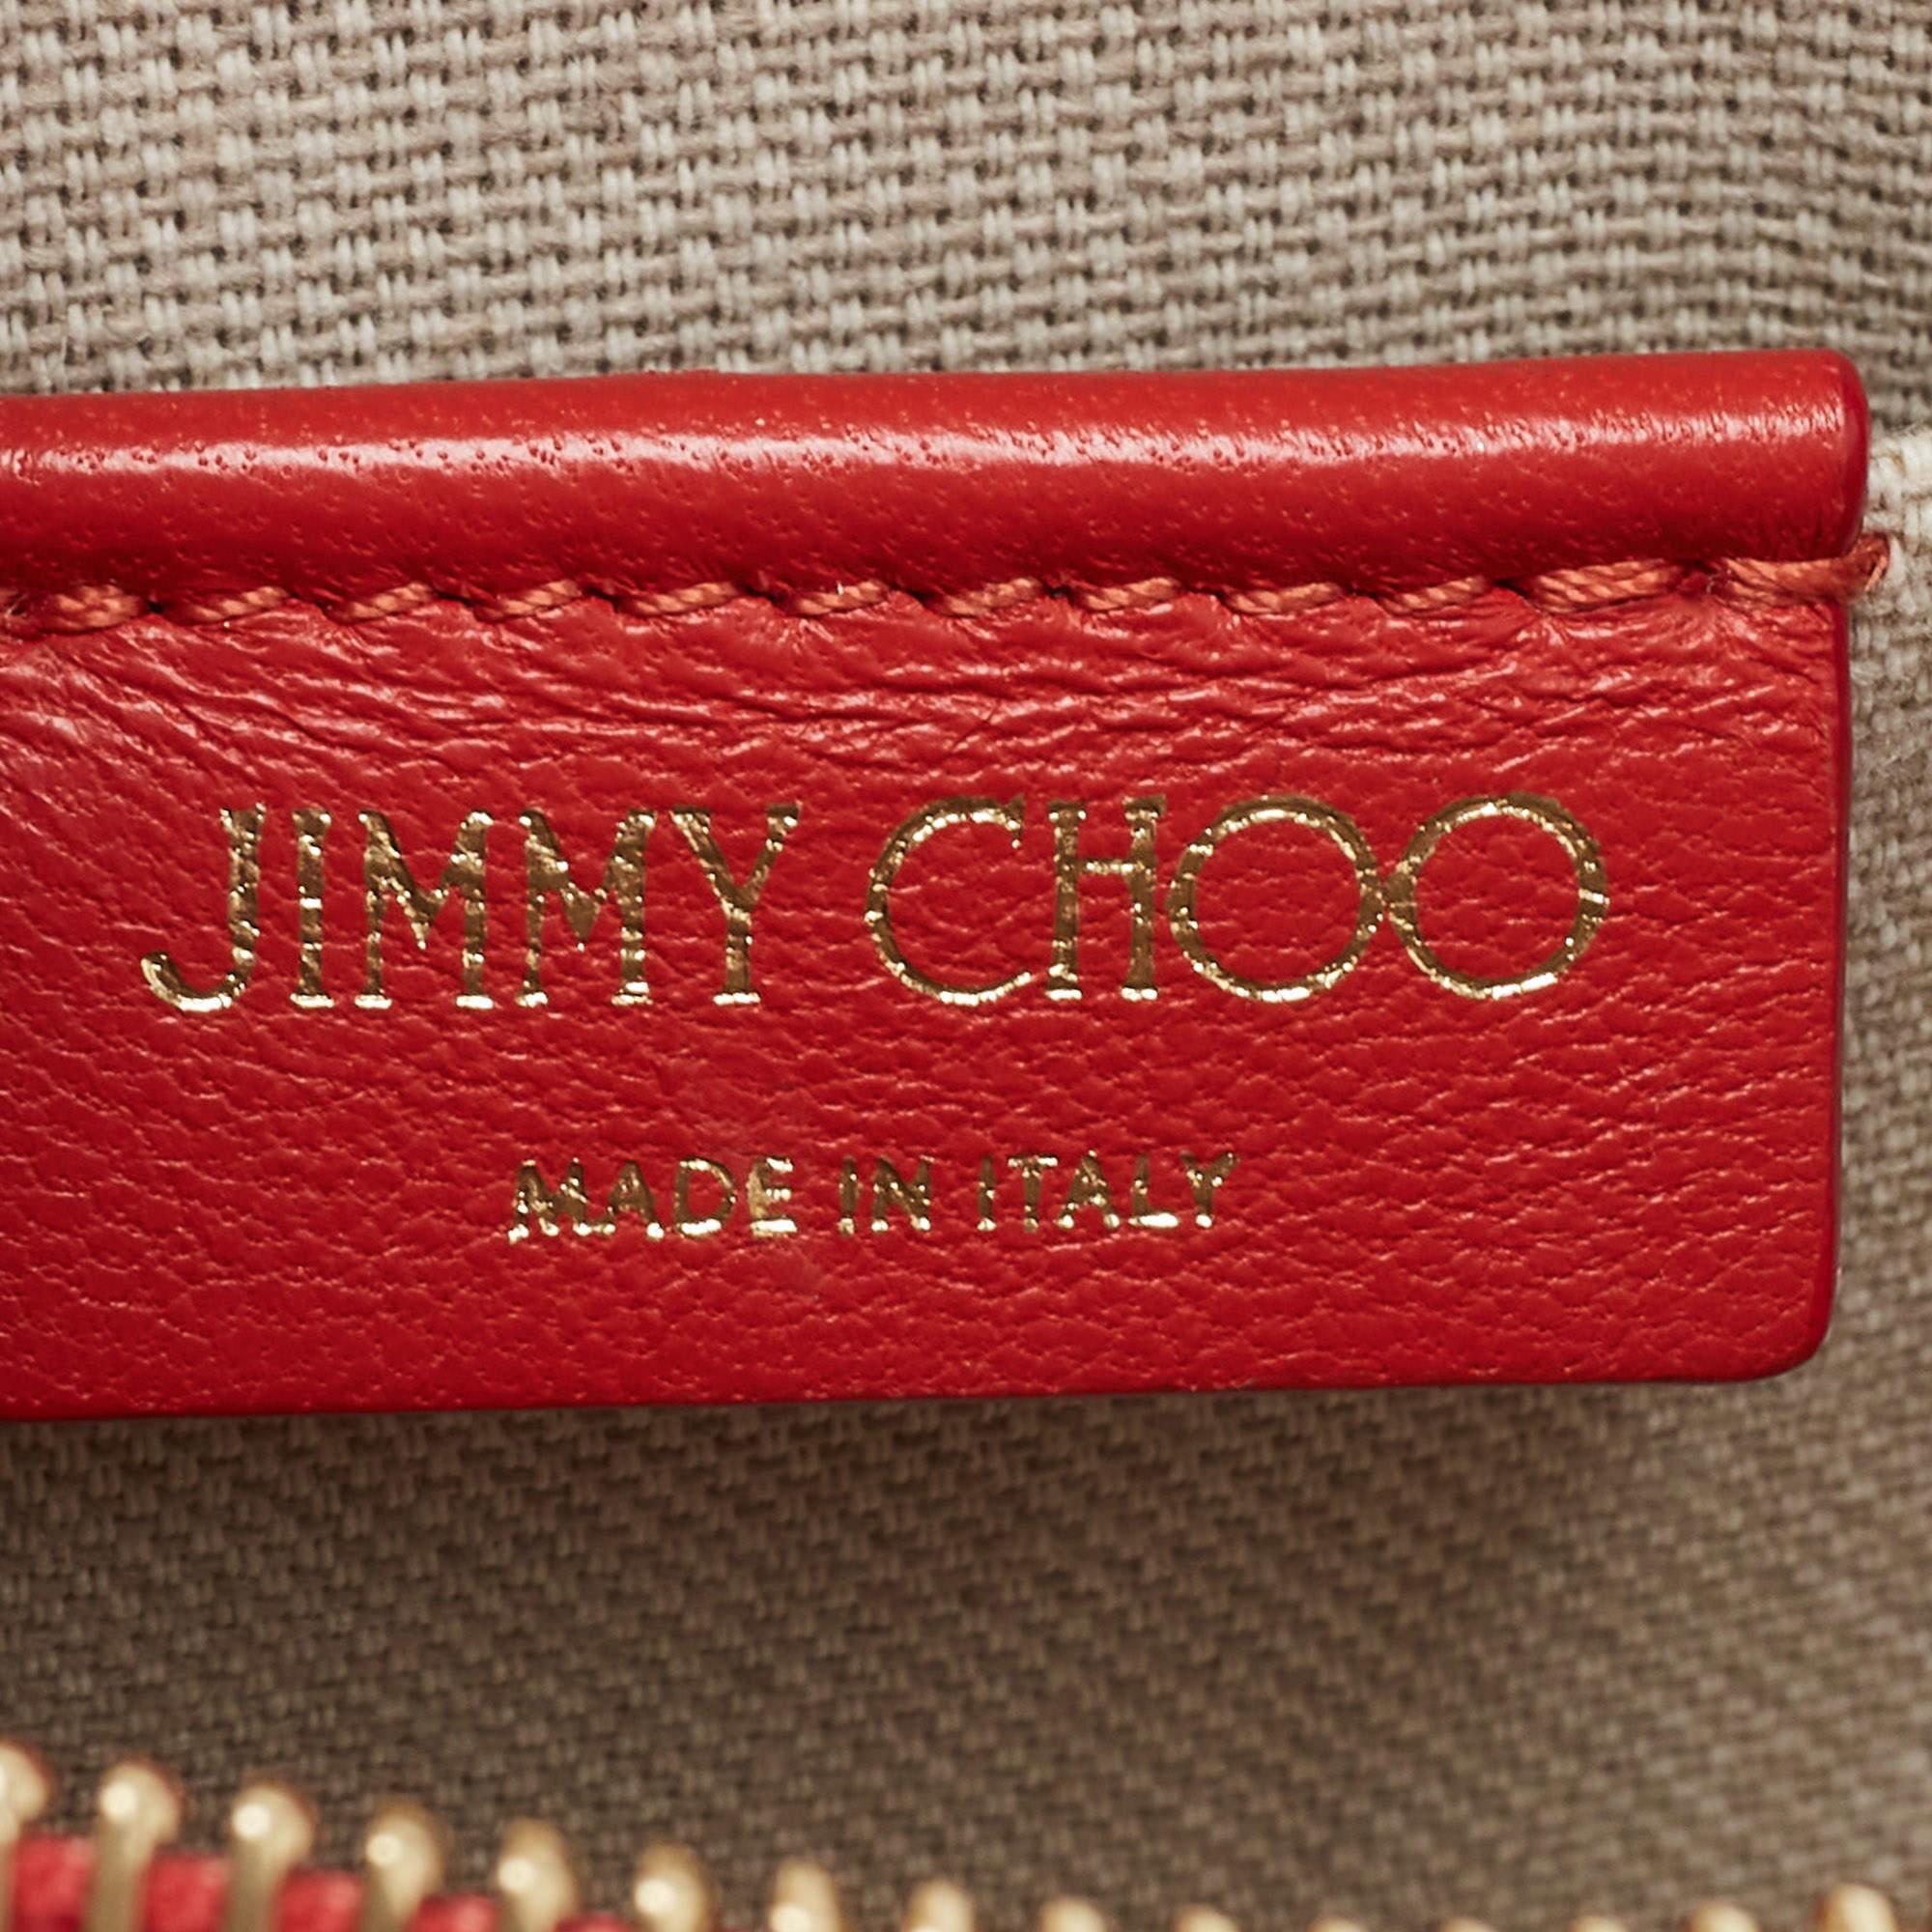 Jimmy Choo Red Leather Half Moon Zip Bag In Excellent Condition For Sale In Dubai, Al Qouz 2